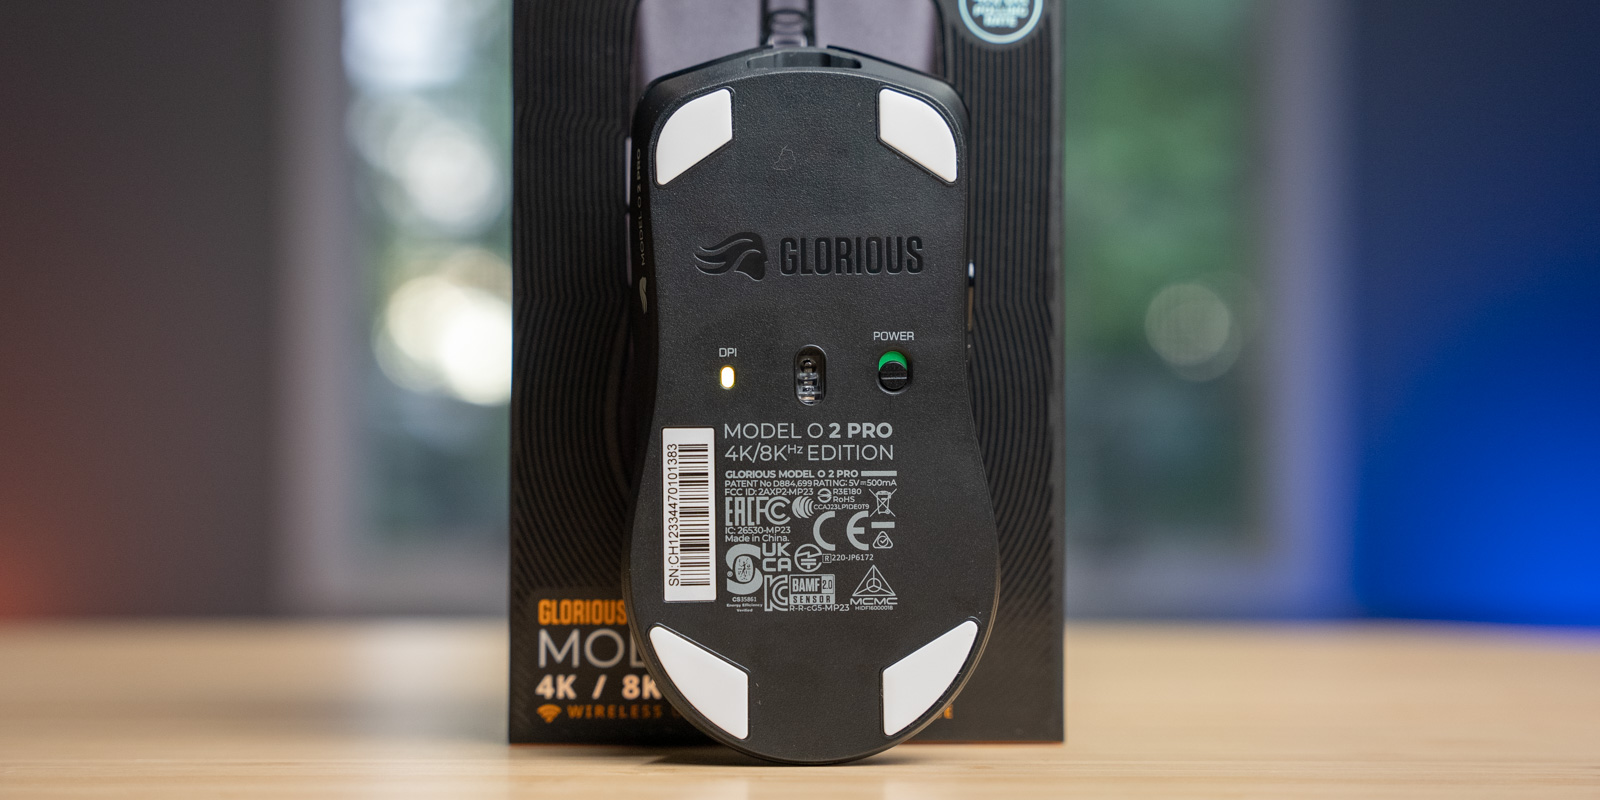 Model O 2 Pro, D 2 Pro from Glorious also get 4K/8K editions